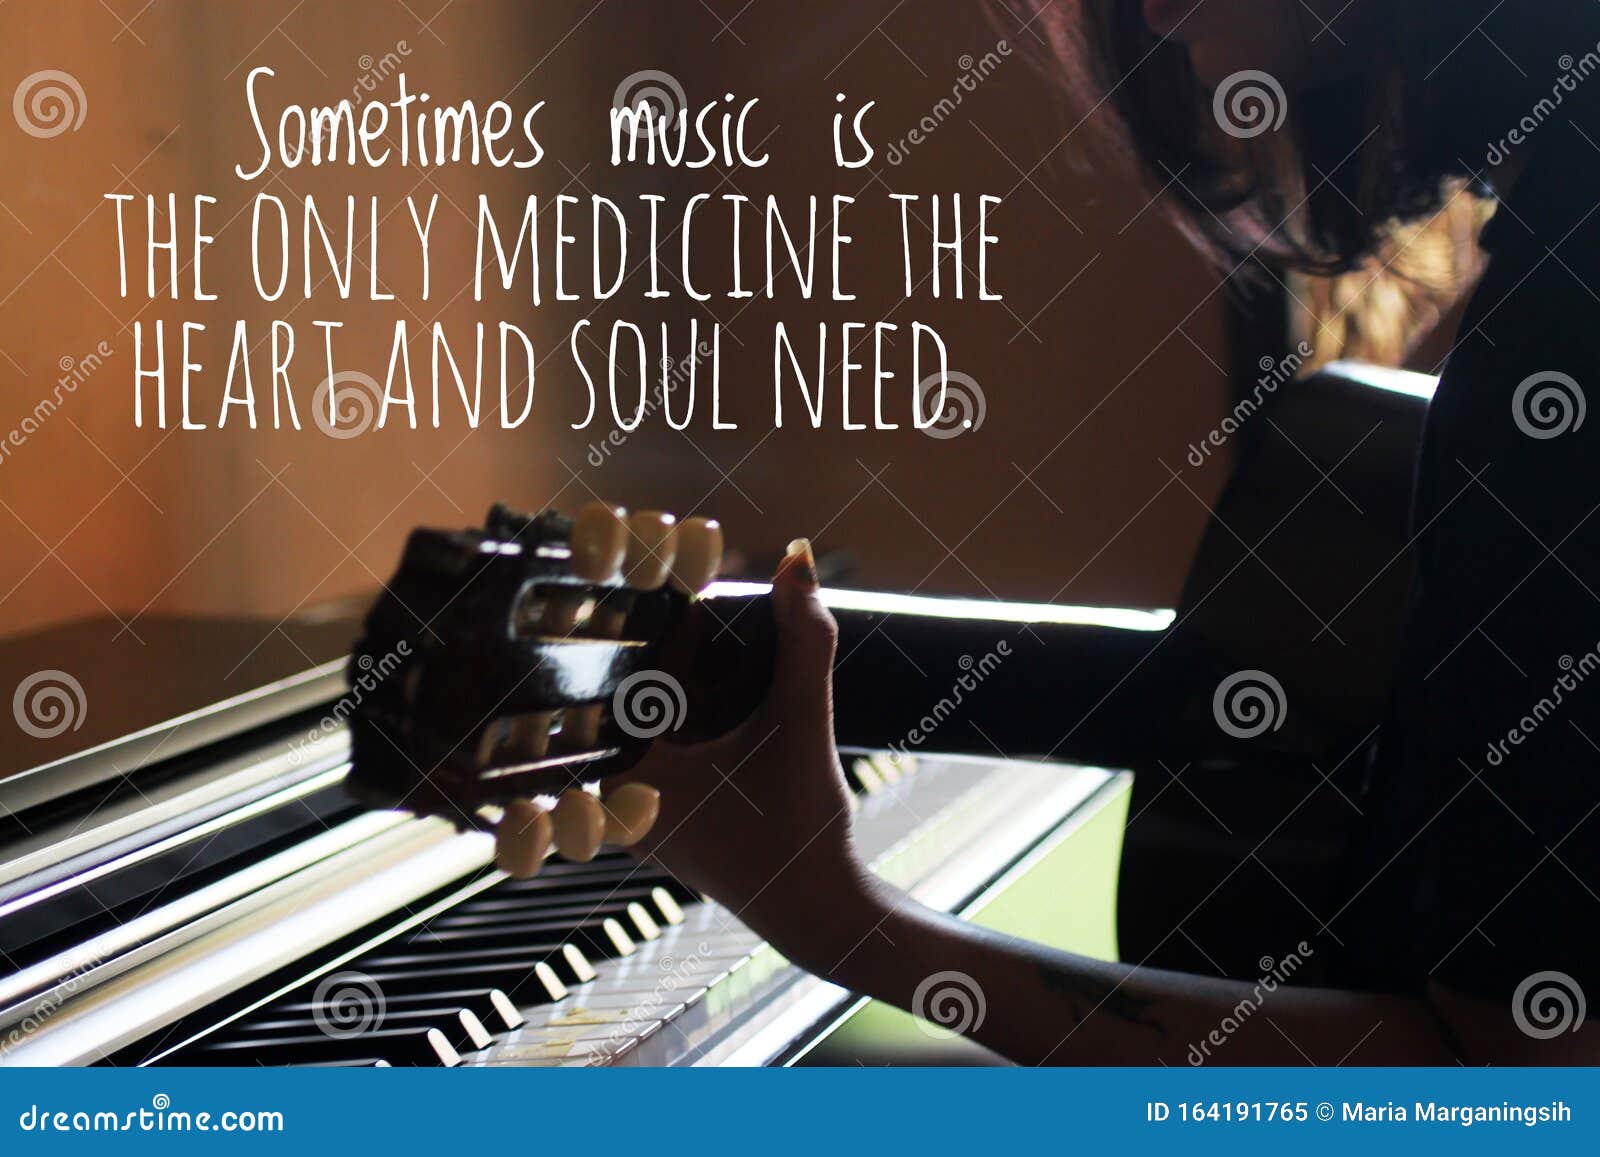 inspirational words - sometimes music is the only medicine the heart and soul need. with silhouette of young woman playing guitar